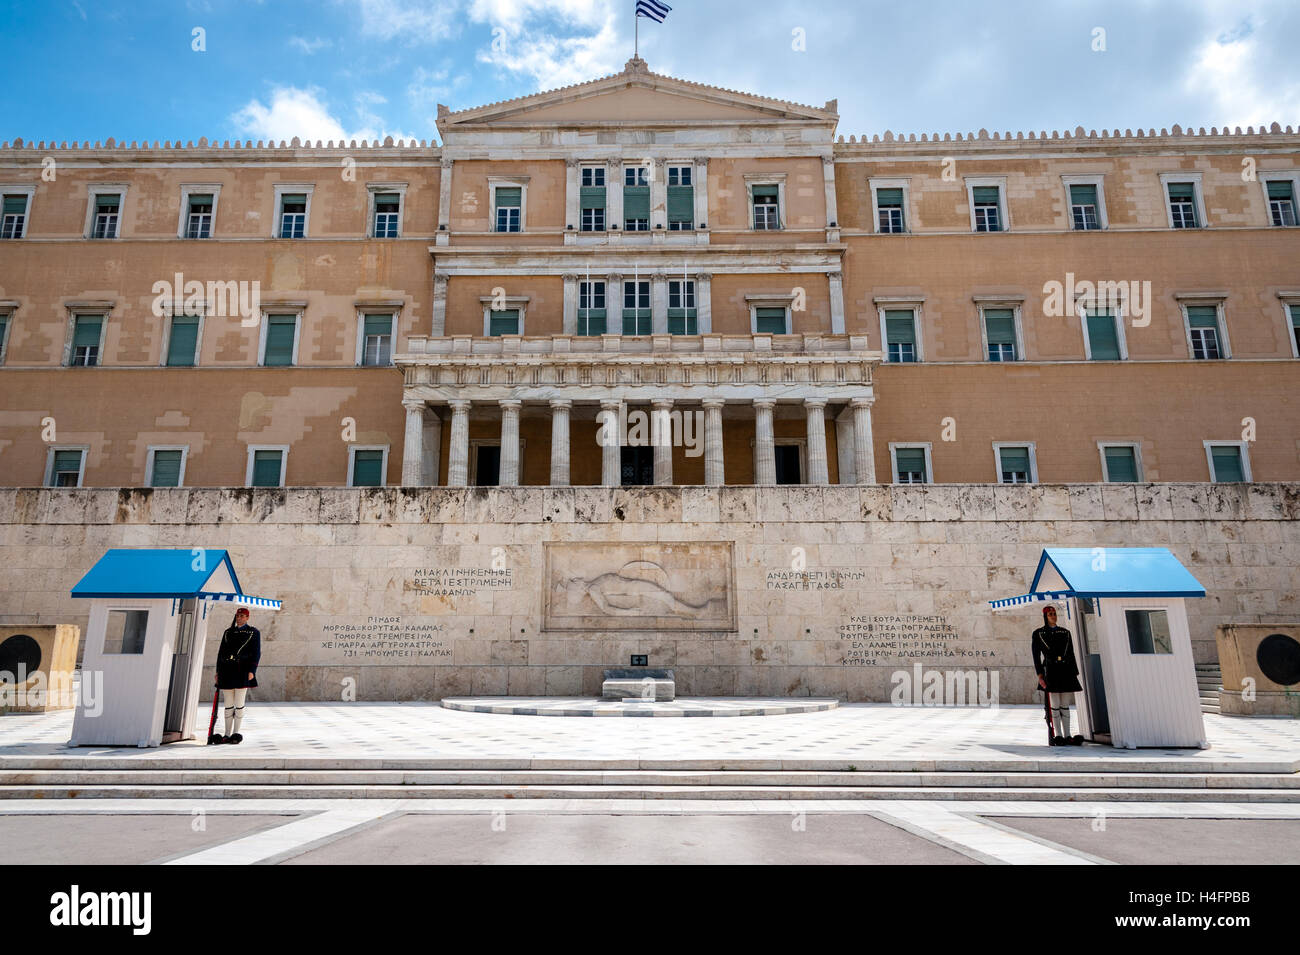 Athens, Greece. Syntagma Square, Evzones guarding the Tomb of the Unknown Soldier. Stock Photo